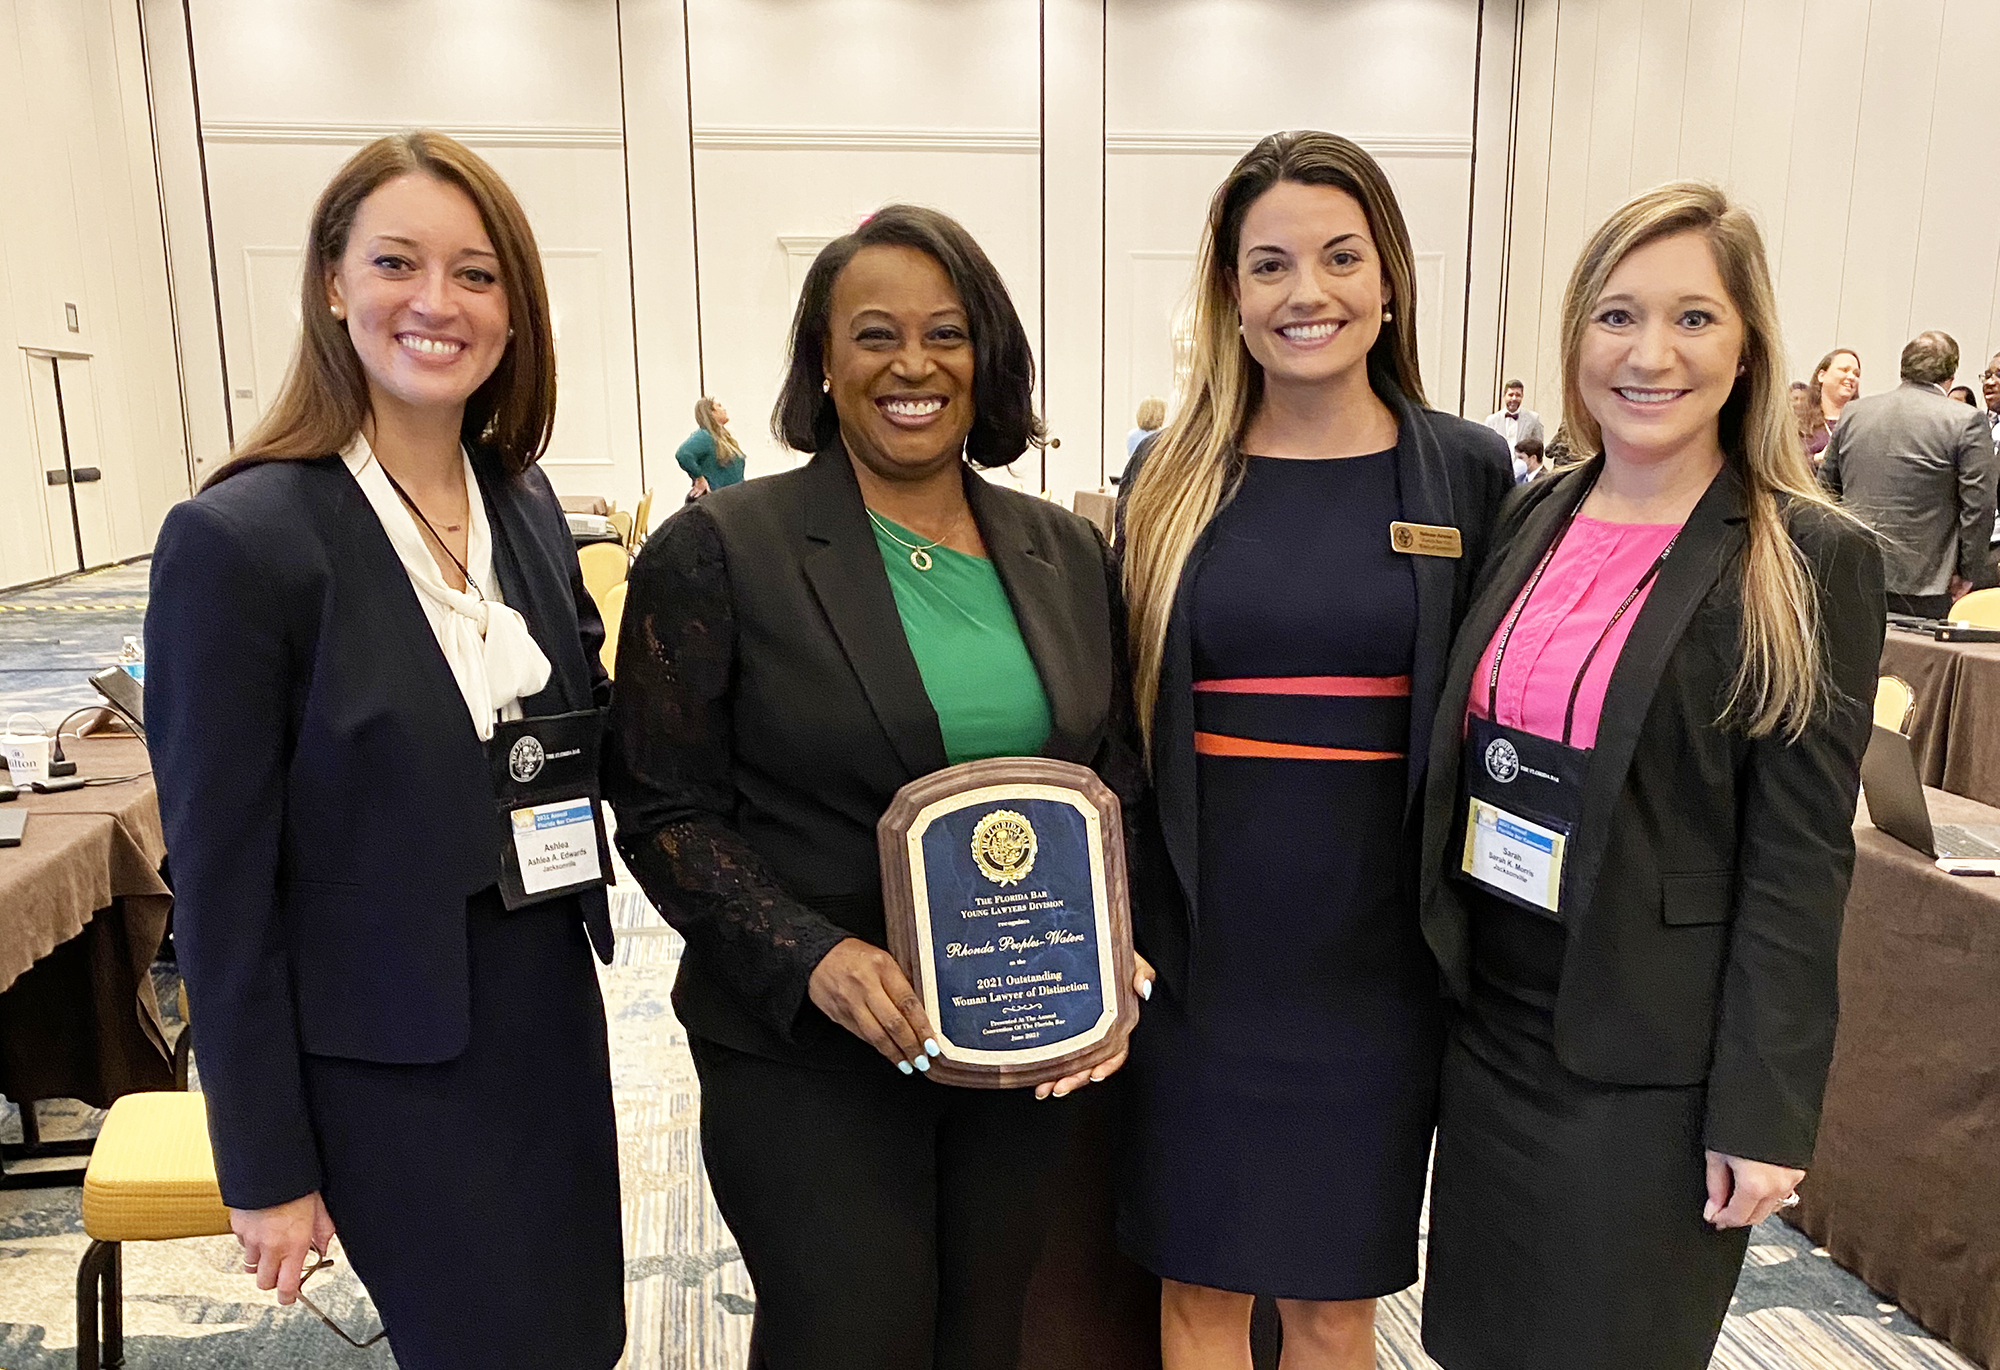 The Florida Bar Young Lawyers Division 4th Circuit Governor Ashlea Edwards; Duval County Judge Rhonda Peoples-Waters; and YLD 4th Circuit Governors Valeen Arena and Sarah Morris.